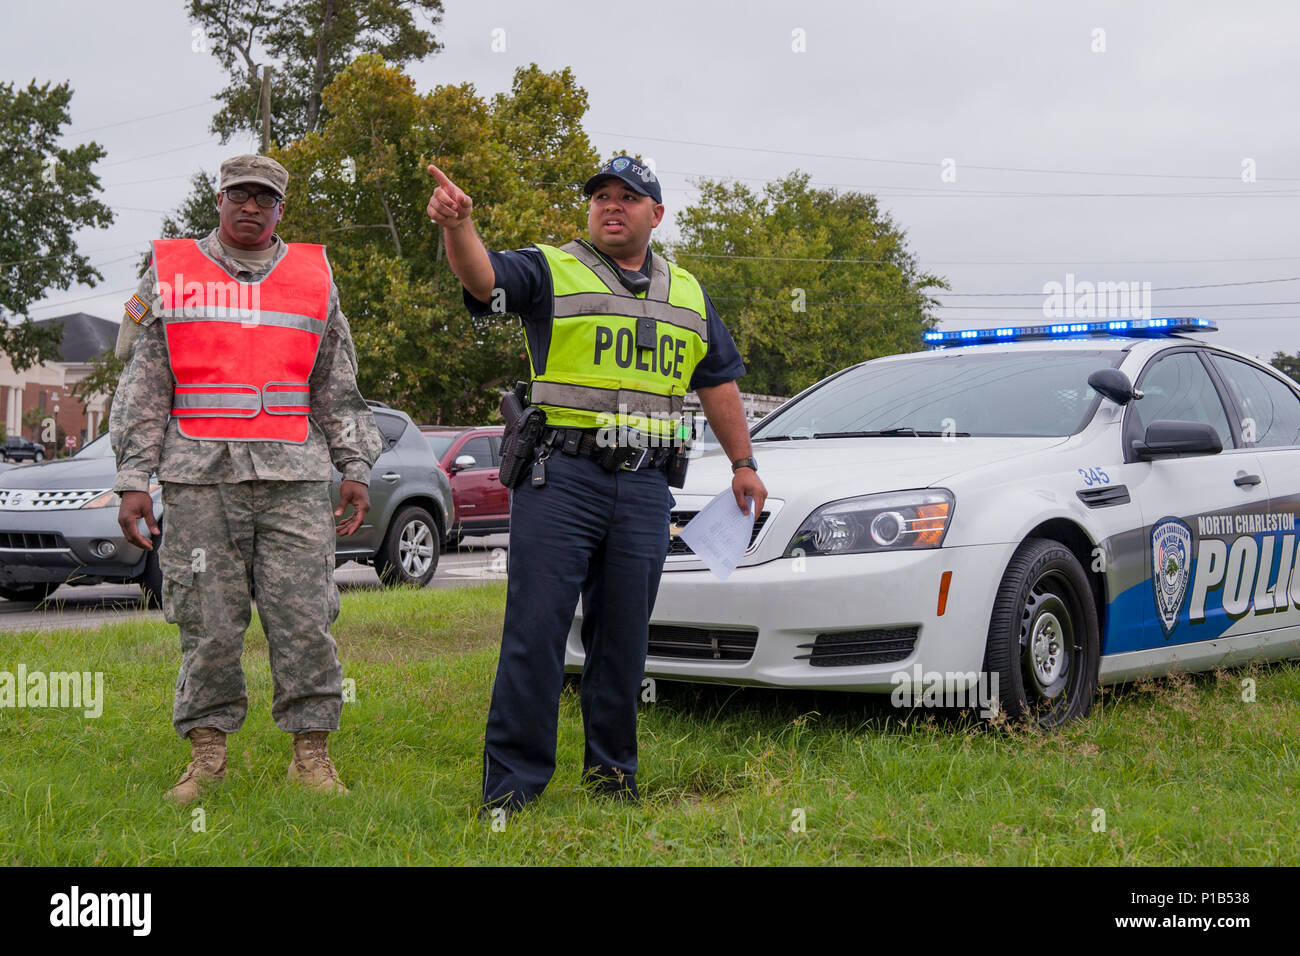 U.S. Army Pvt. 1st Class Bradley Burgess, C Company, 1st Battalion 118th Infantry Regiment, South Carolina Army National Guard, and City of North Charleston Patrolman 1st Class Giovanni Brown manage a traffic control point in North Charleston, South Carolina, Oct. 5, 2016.  Hurricane Matthew peaked as a Category 4 hurricane in the Caribbean and was projected to pass over the southeastern U.S., including the S.C. coast. Approximately 1,400 S.C. National Guard Soldiers and Airmen were activated Oct. 4, 2016, to support coastal evacuations after Governor Nikki Haley declared a State of Emergency. Stock Photo